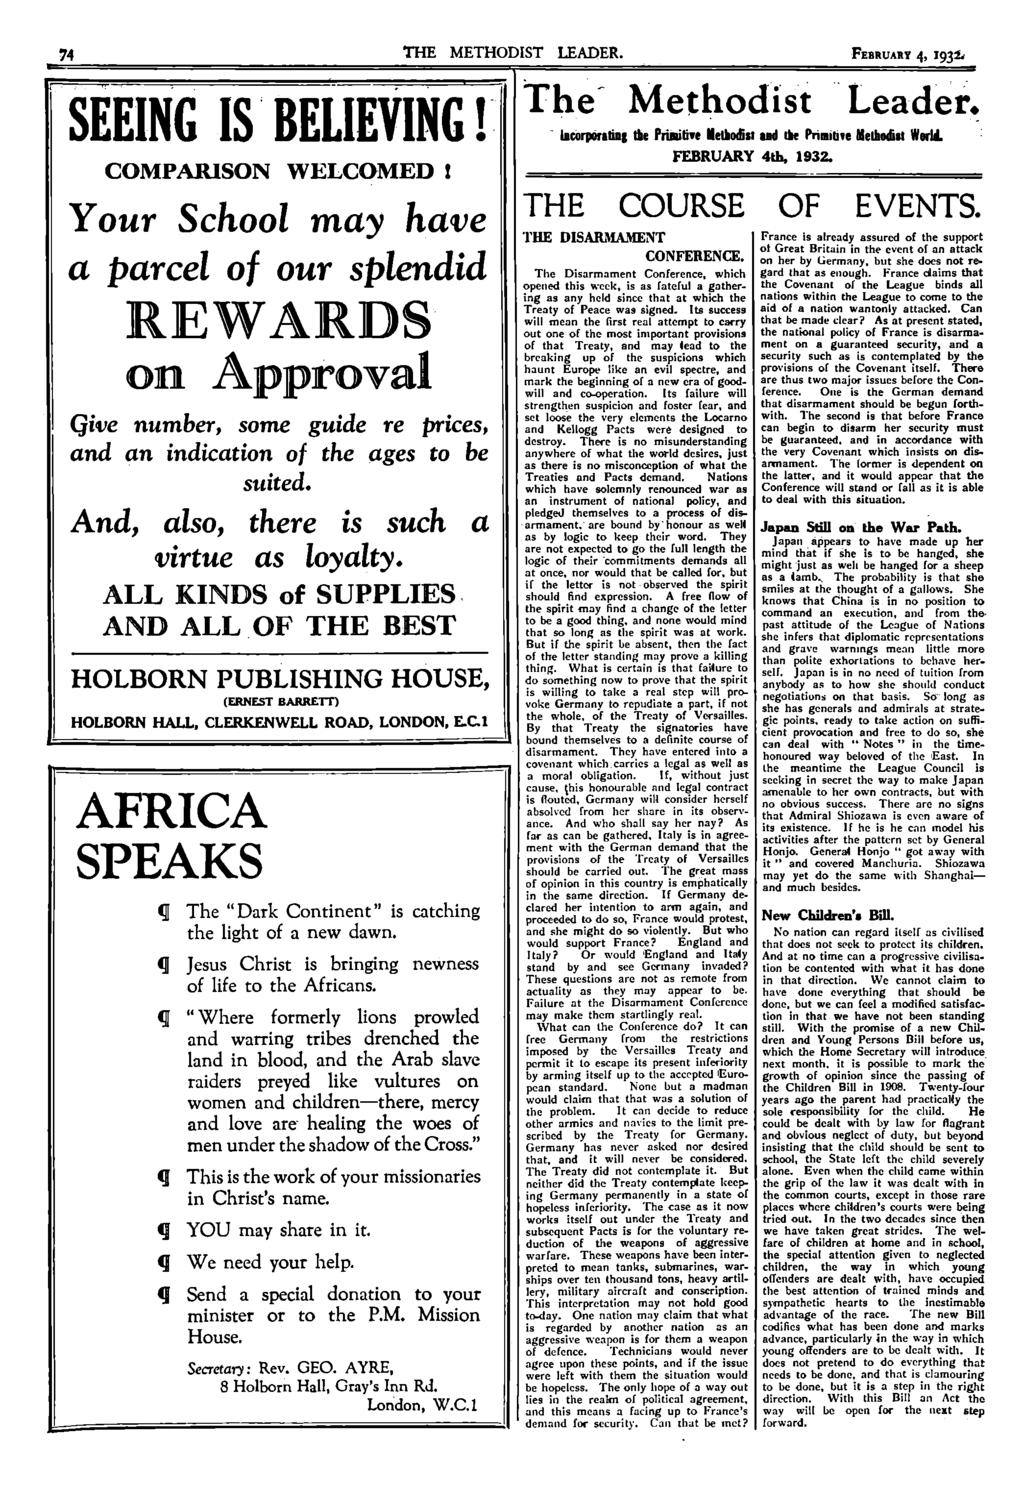 74 THE METHODIST LEADER. FEBRUARY 4, 1932. SEEING IS BELIEVING! COMPARISON WELCOMED!